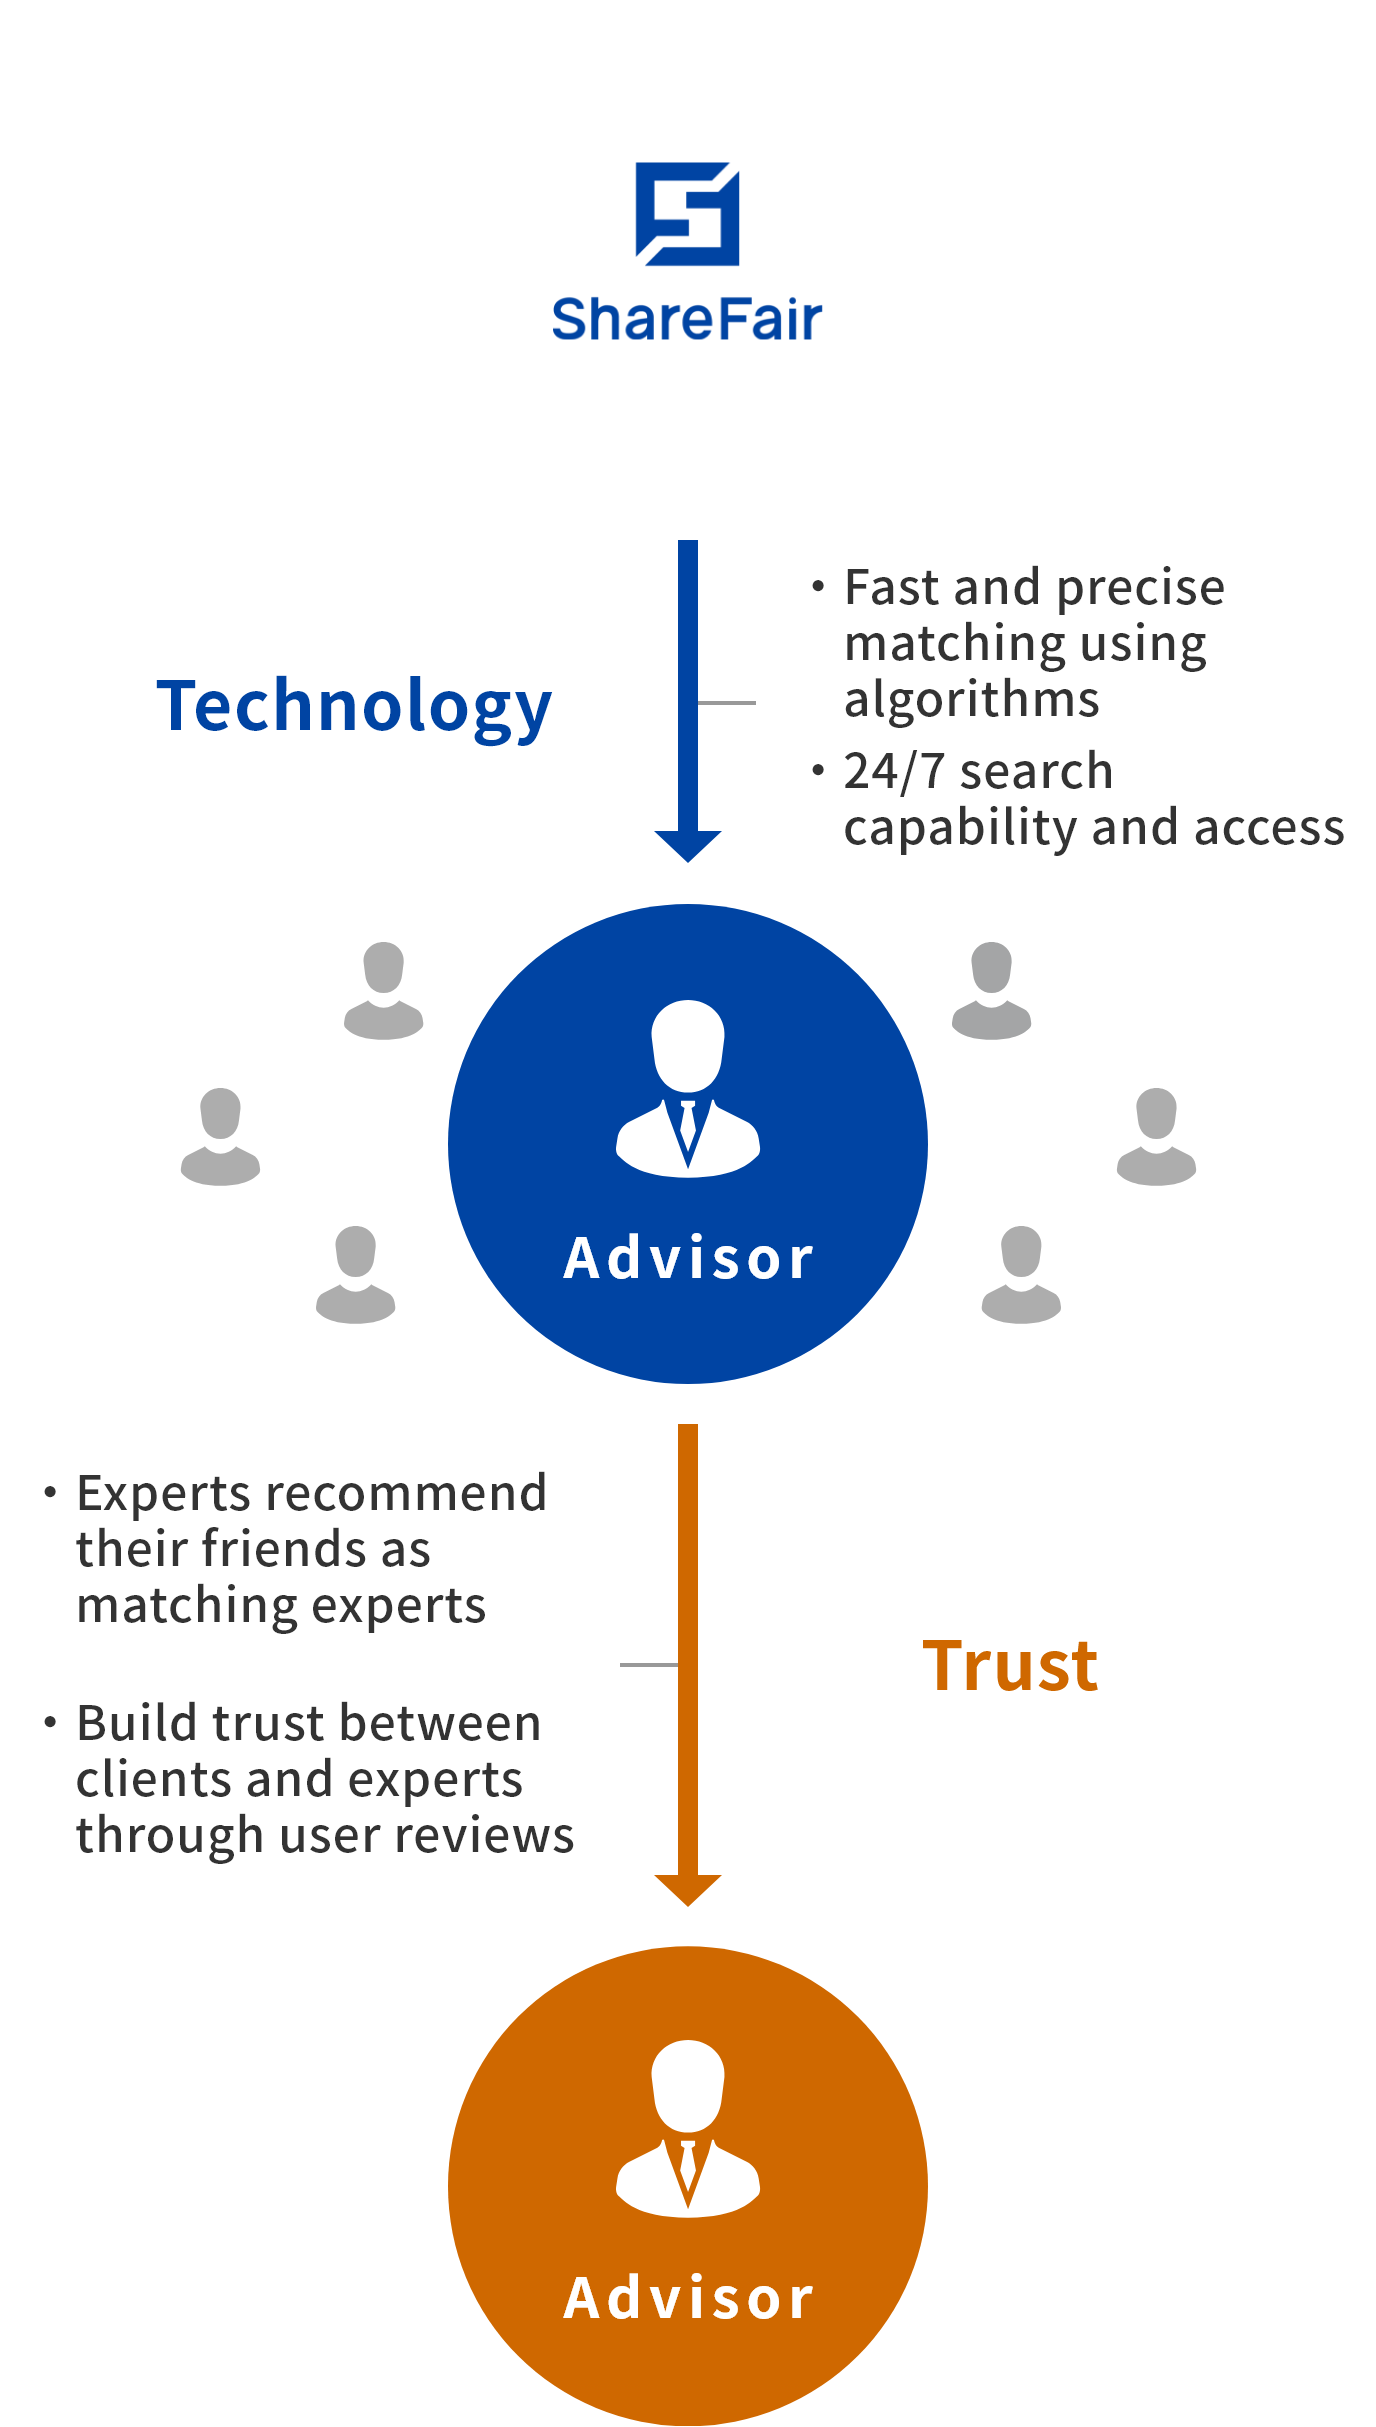 ShareFair offers a platform that quickly finds true experts with the answers to your business questions by using Algorithm and Expert-to-expert network. Approach: Fast and precise matching using algorithms, 24/7 search capability and access, Experts recommend their friends as matching experts, Build trust between clients and experts through user reviews.